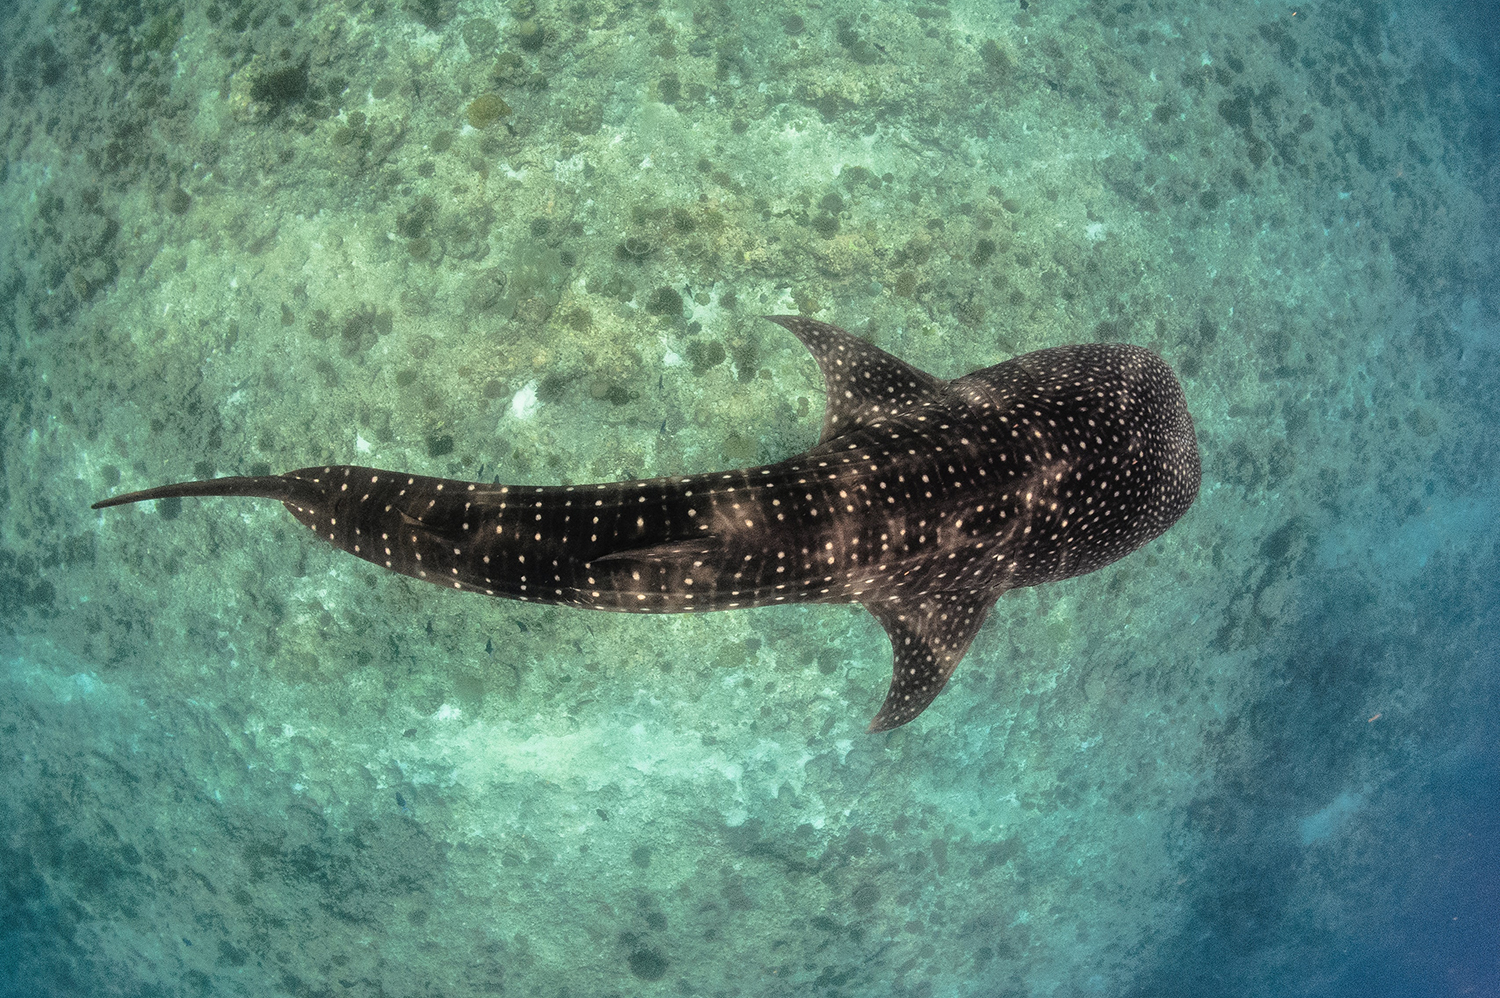 The Whale Shark of La Paz (Rhincodon Typus) - Get to Know the Gentle Giant